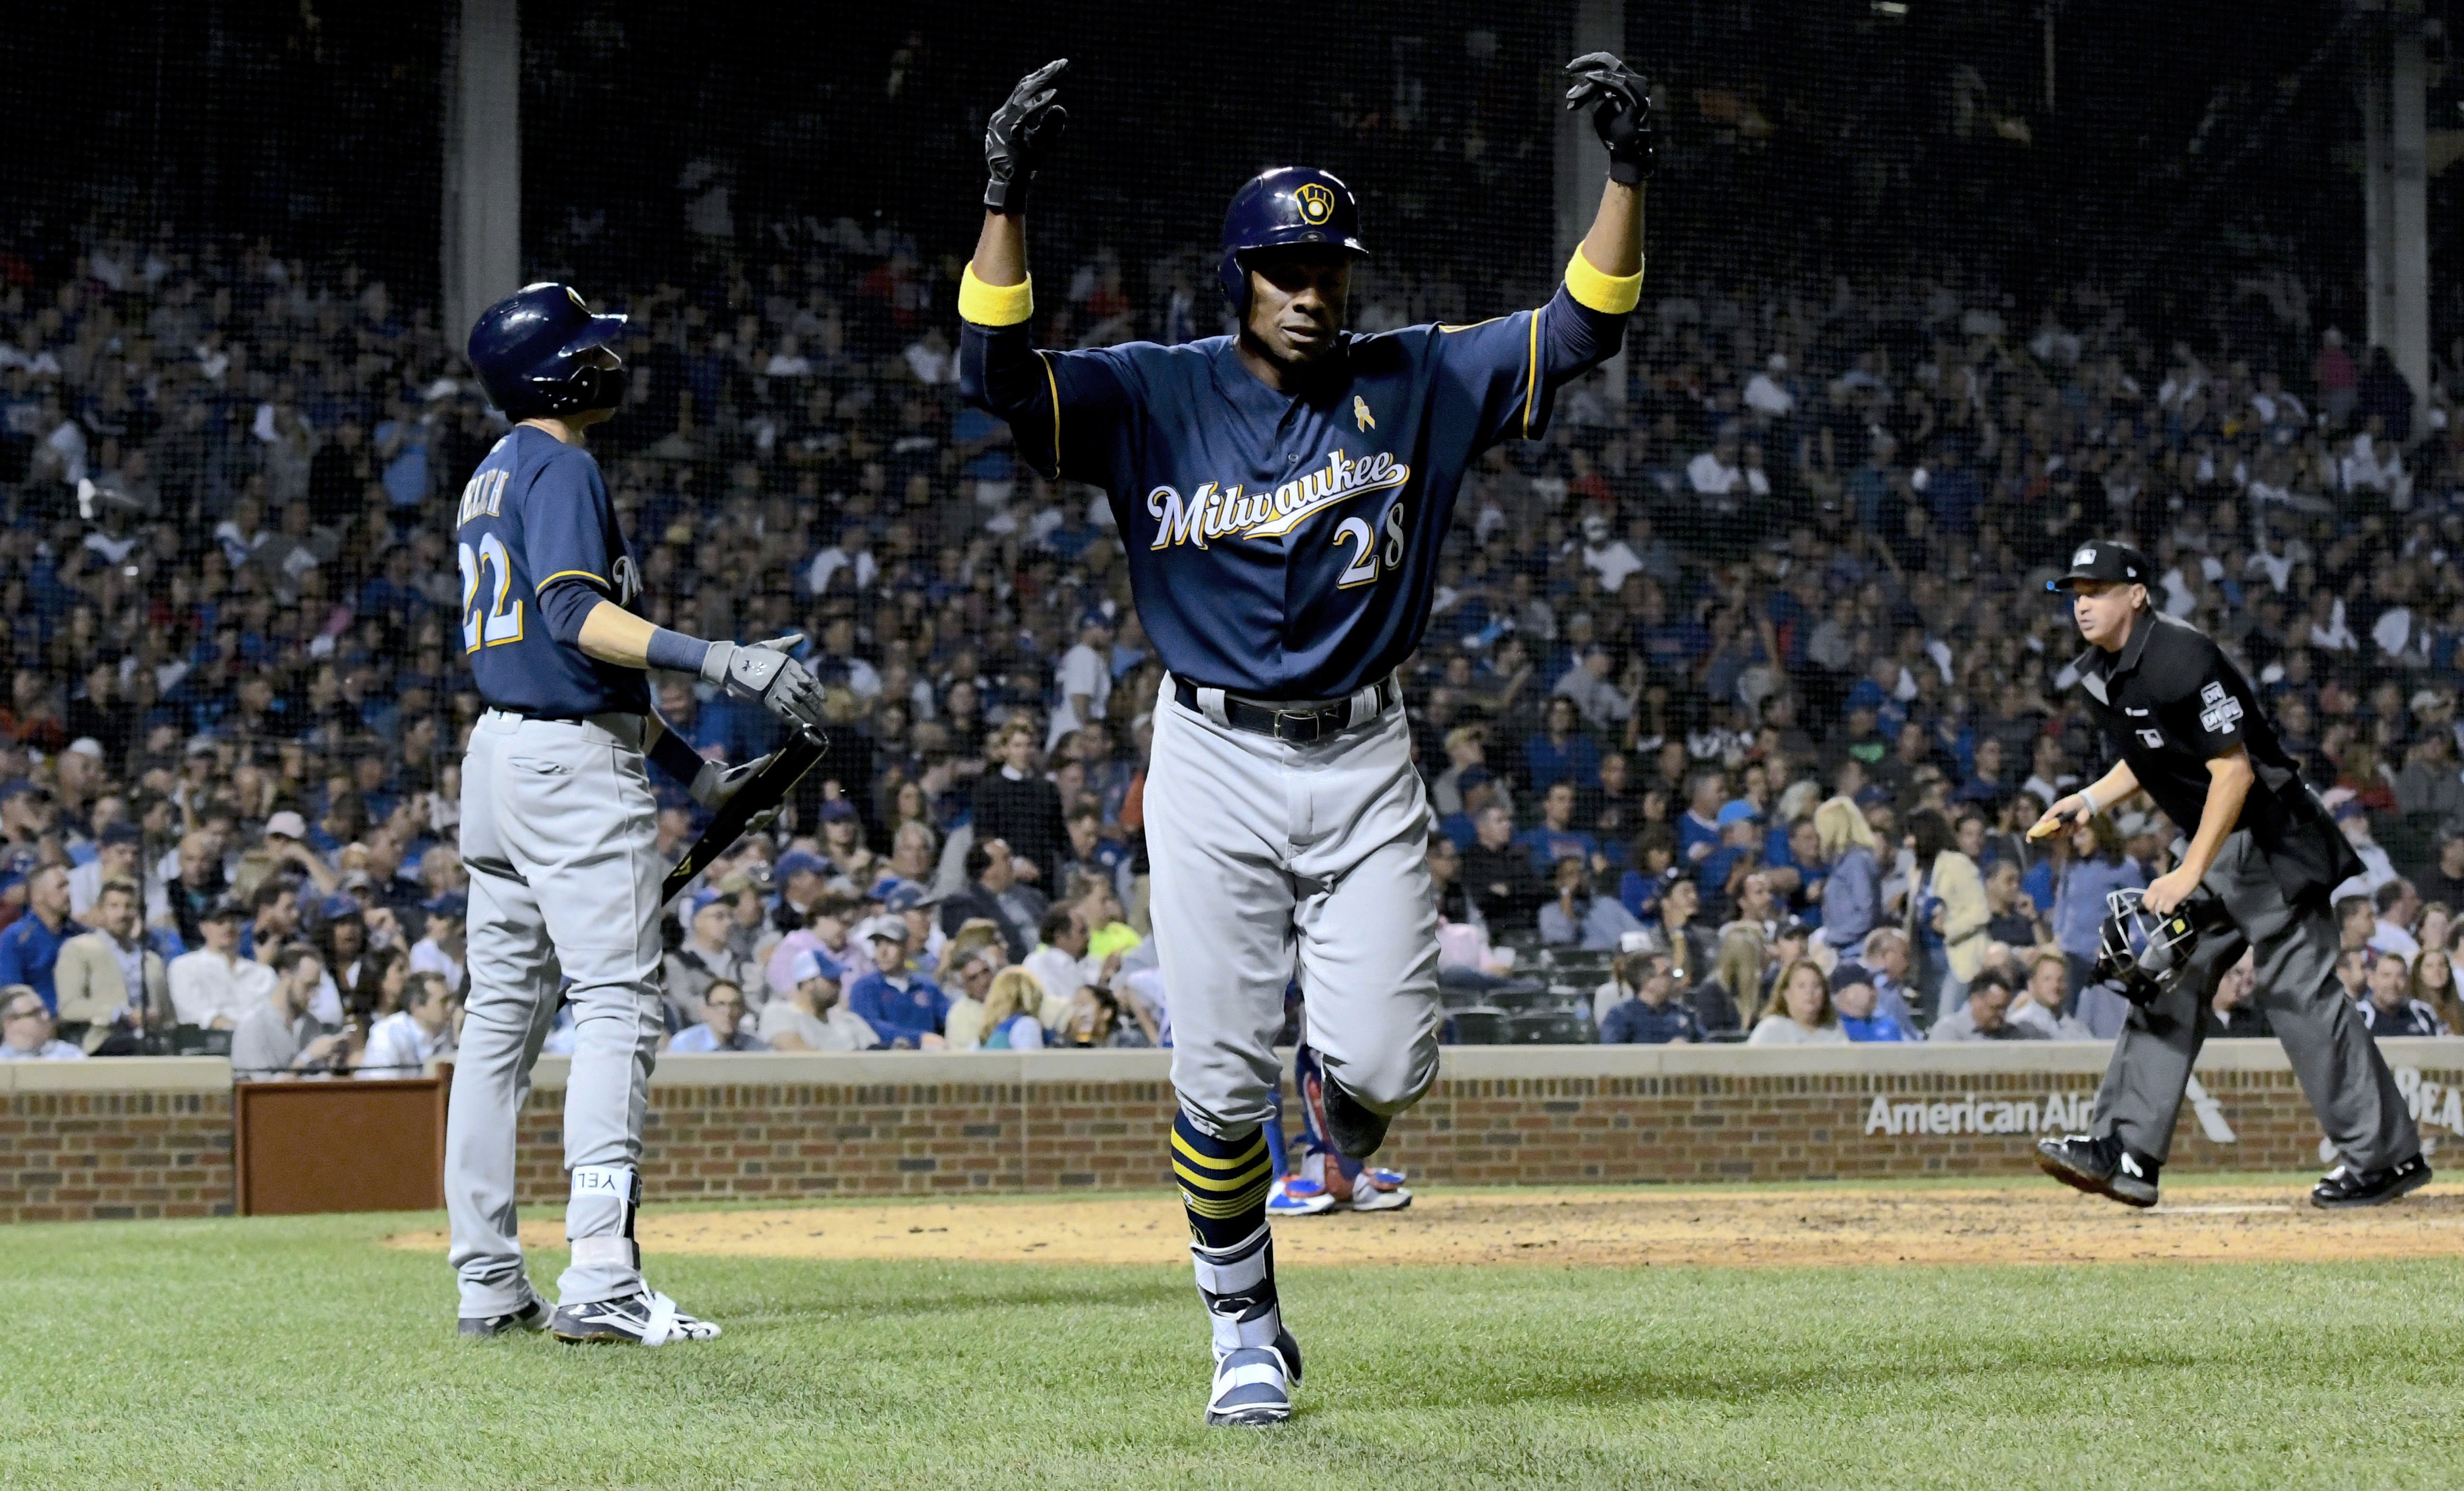 Brewers beat Cubs 5-1 to move within 1 game in NL Central